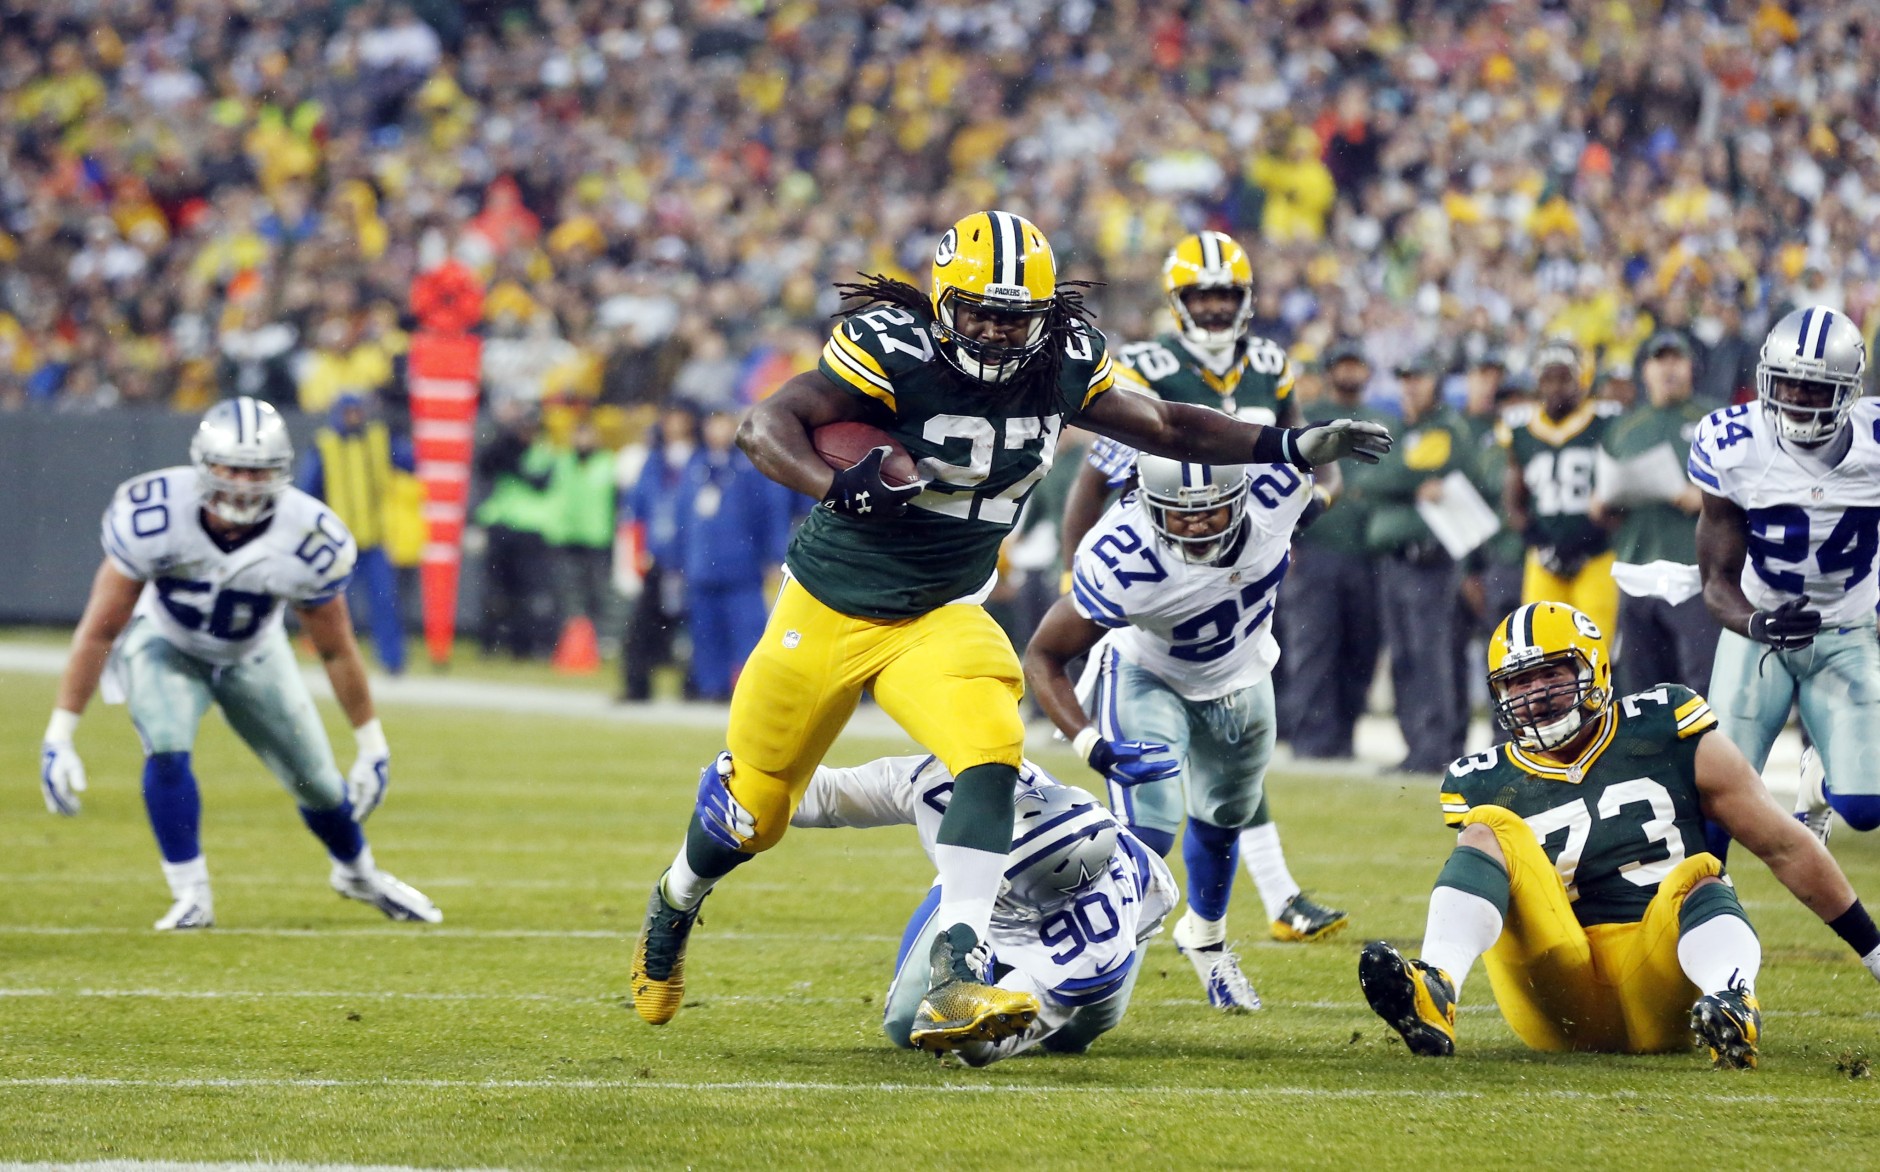 Green Bay Packers' Eddie Lacy runs during the first half of an NFL football game against the Dallas Cowboys Sunday, Dec. 13, 2015, in Green Bay, Wis. (AP Photo/Mike Roemer)